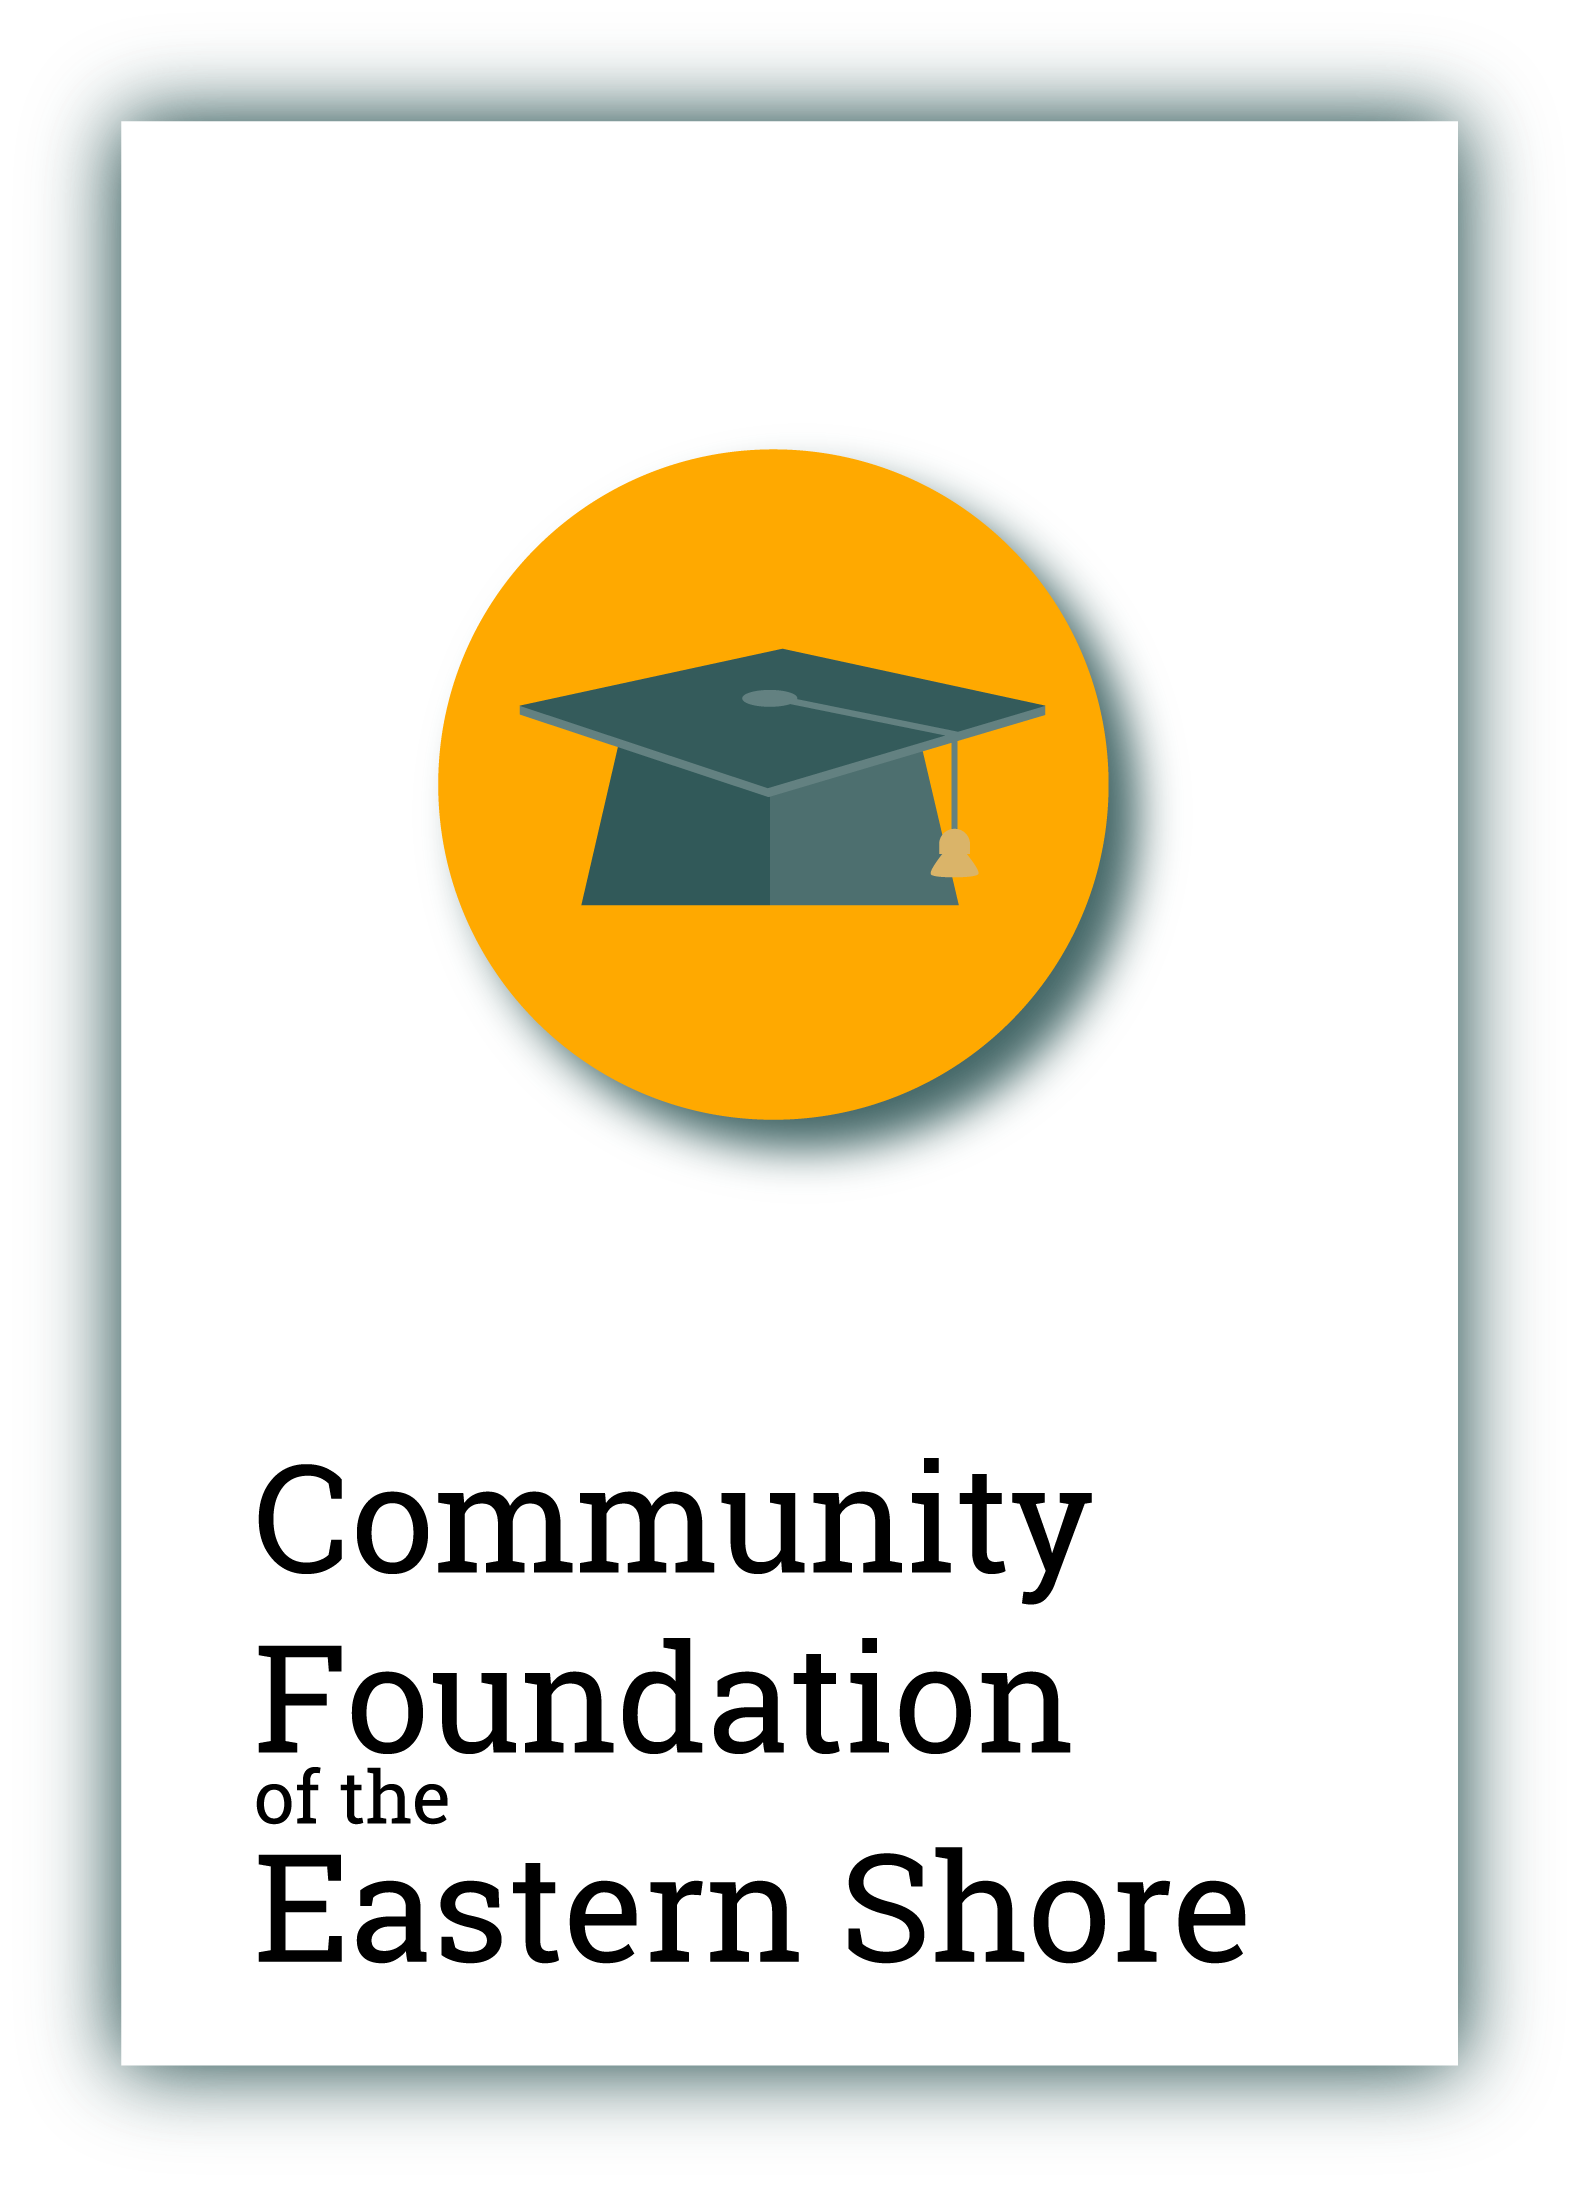 Community Foundation of the Eastern Shore 2